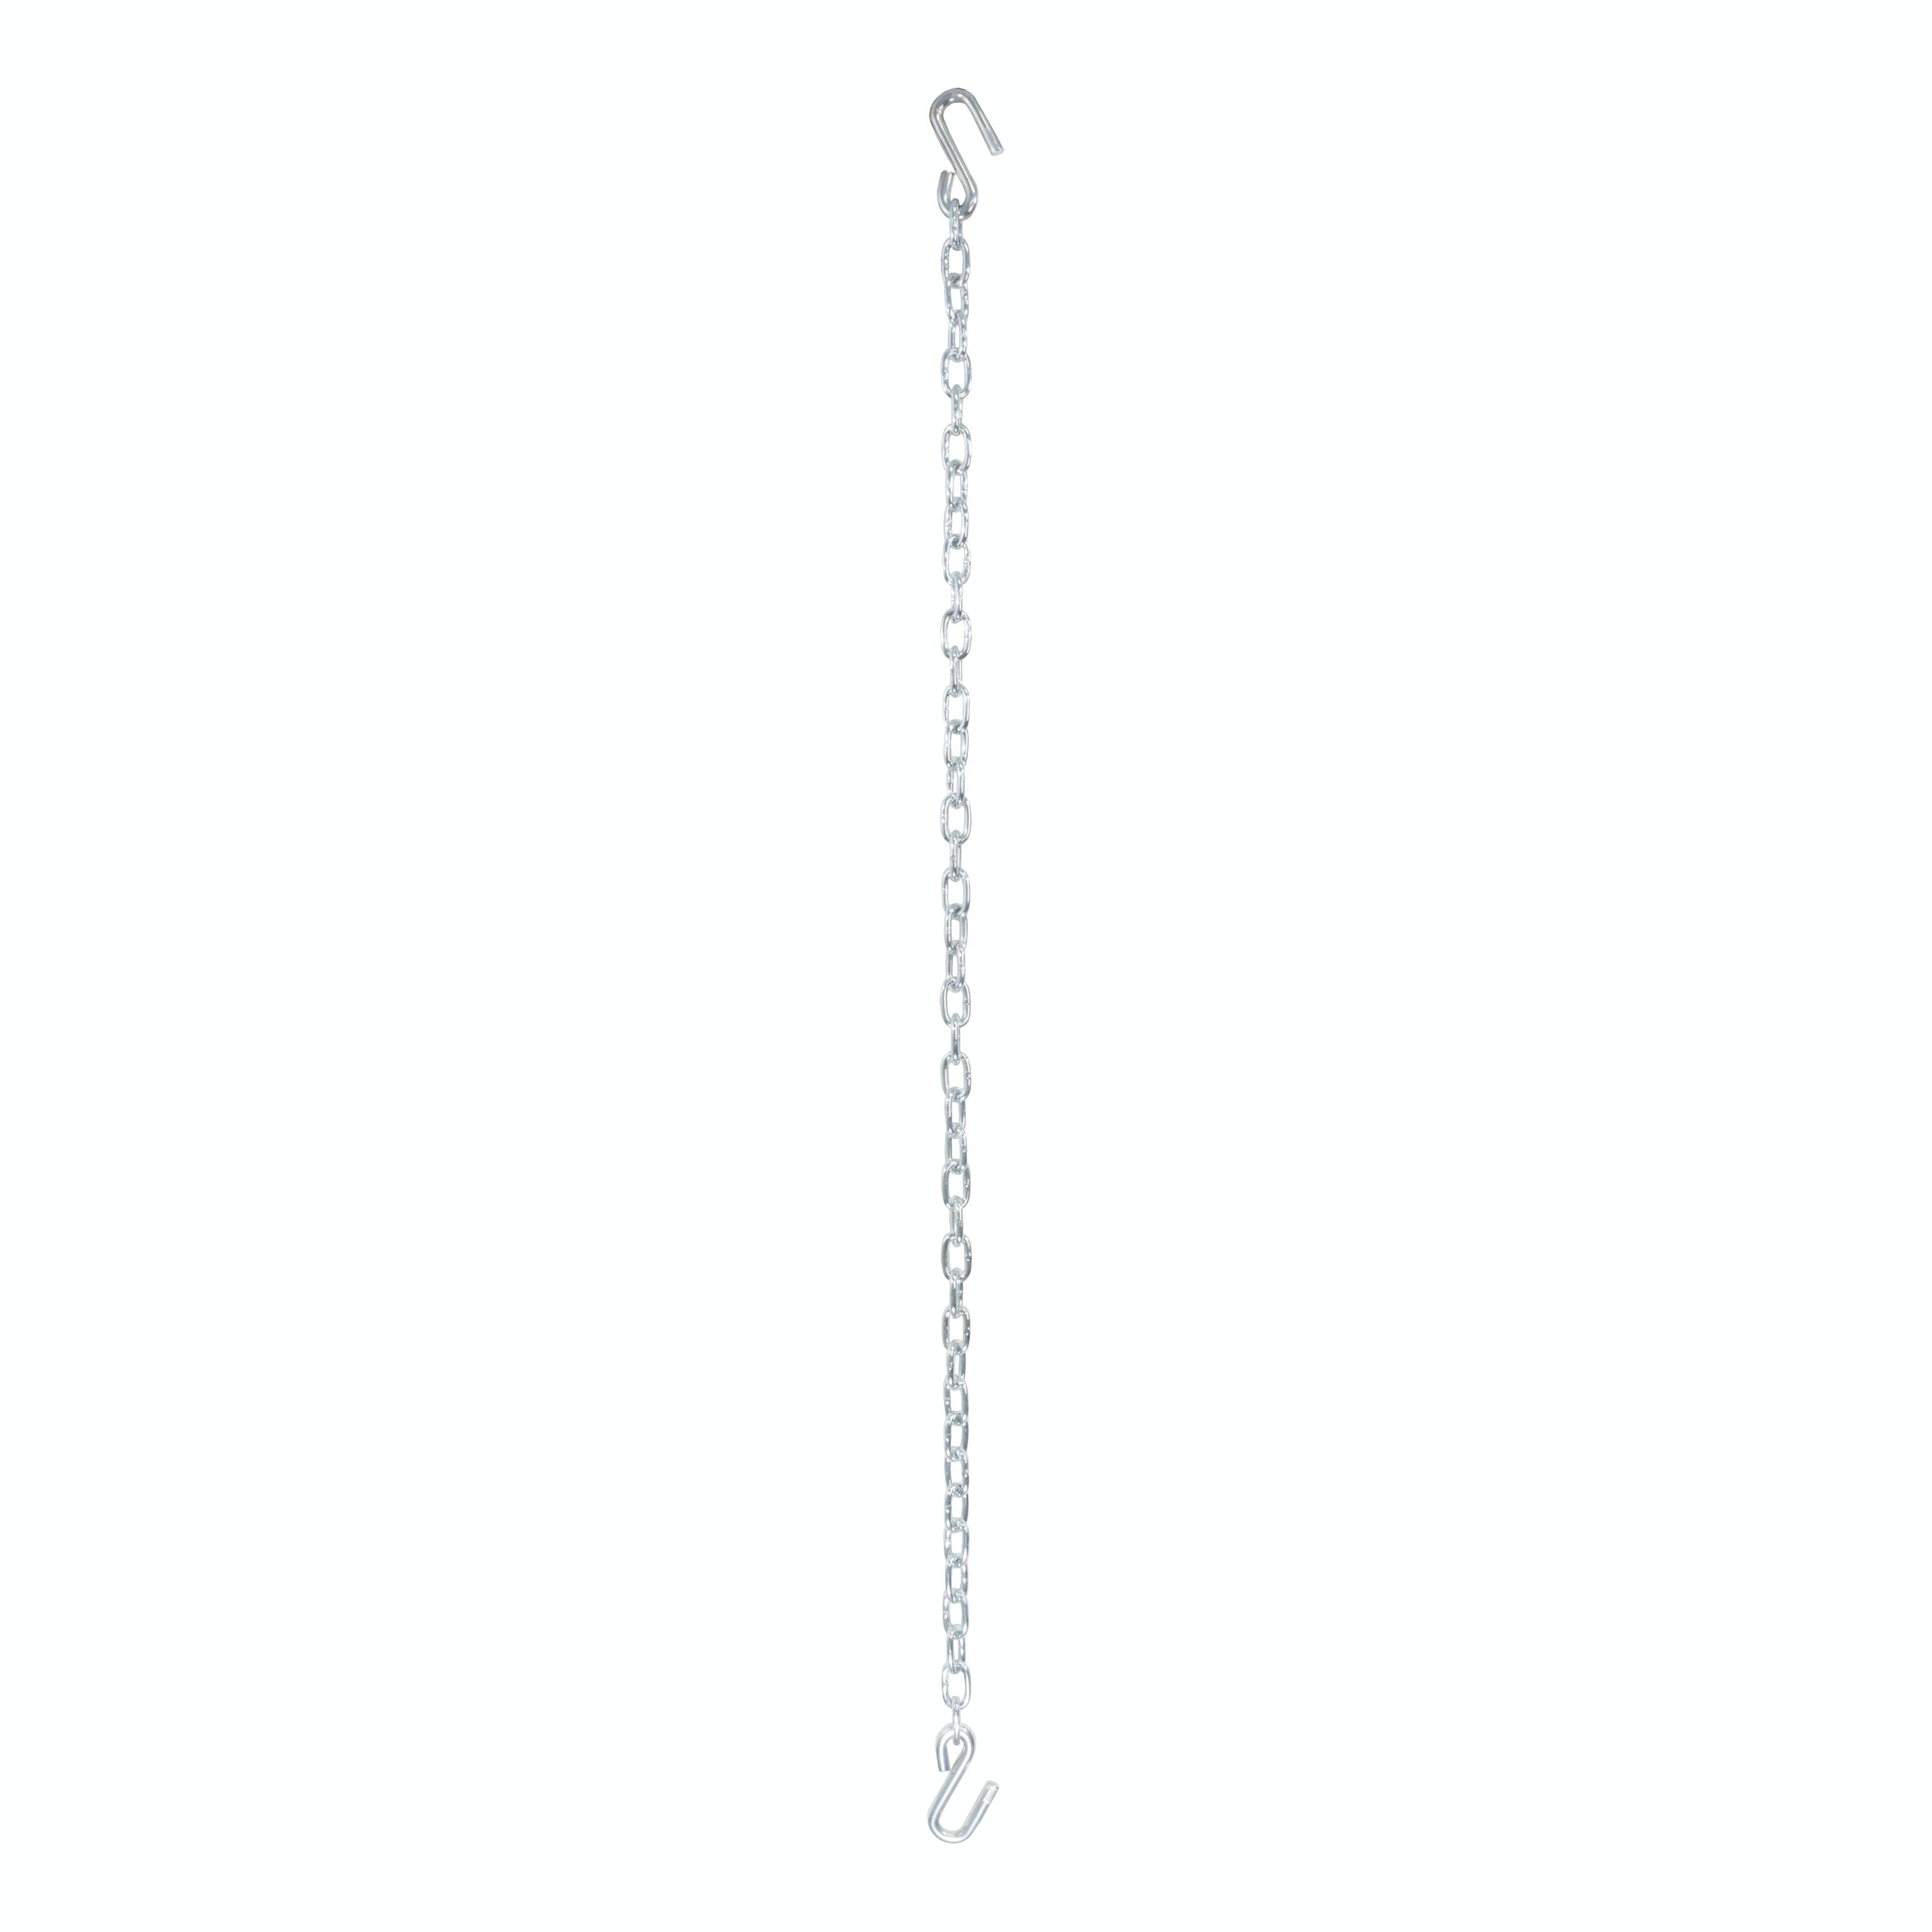 CURT 80010 48 Safety Chain with 2 S-Hooks (2,000 lbs, Clear Zinc)